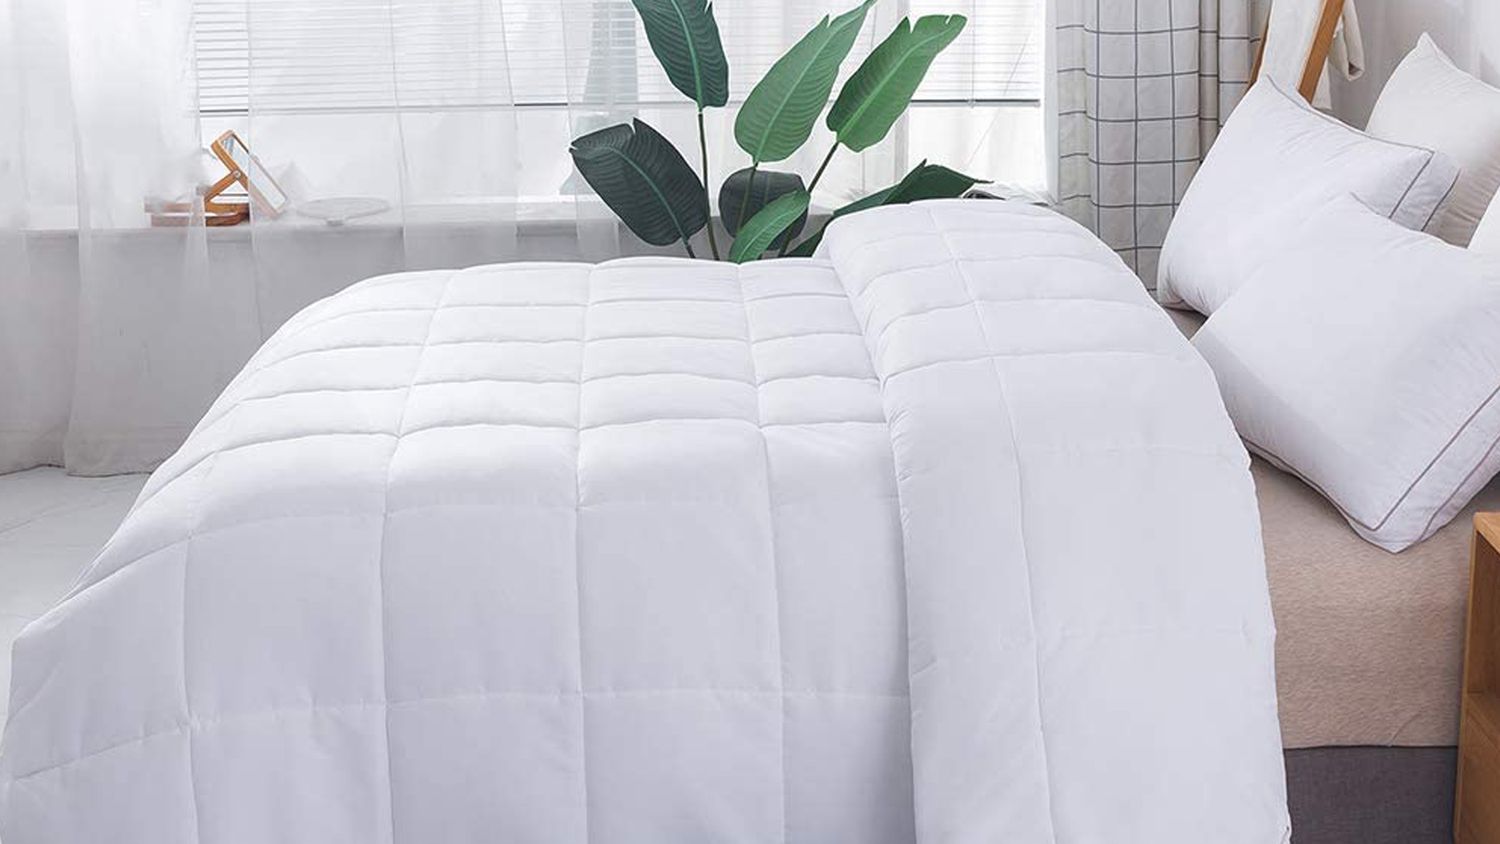 DOWNCOOL Down Alternative Quilted Comforter